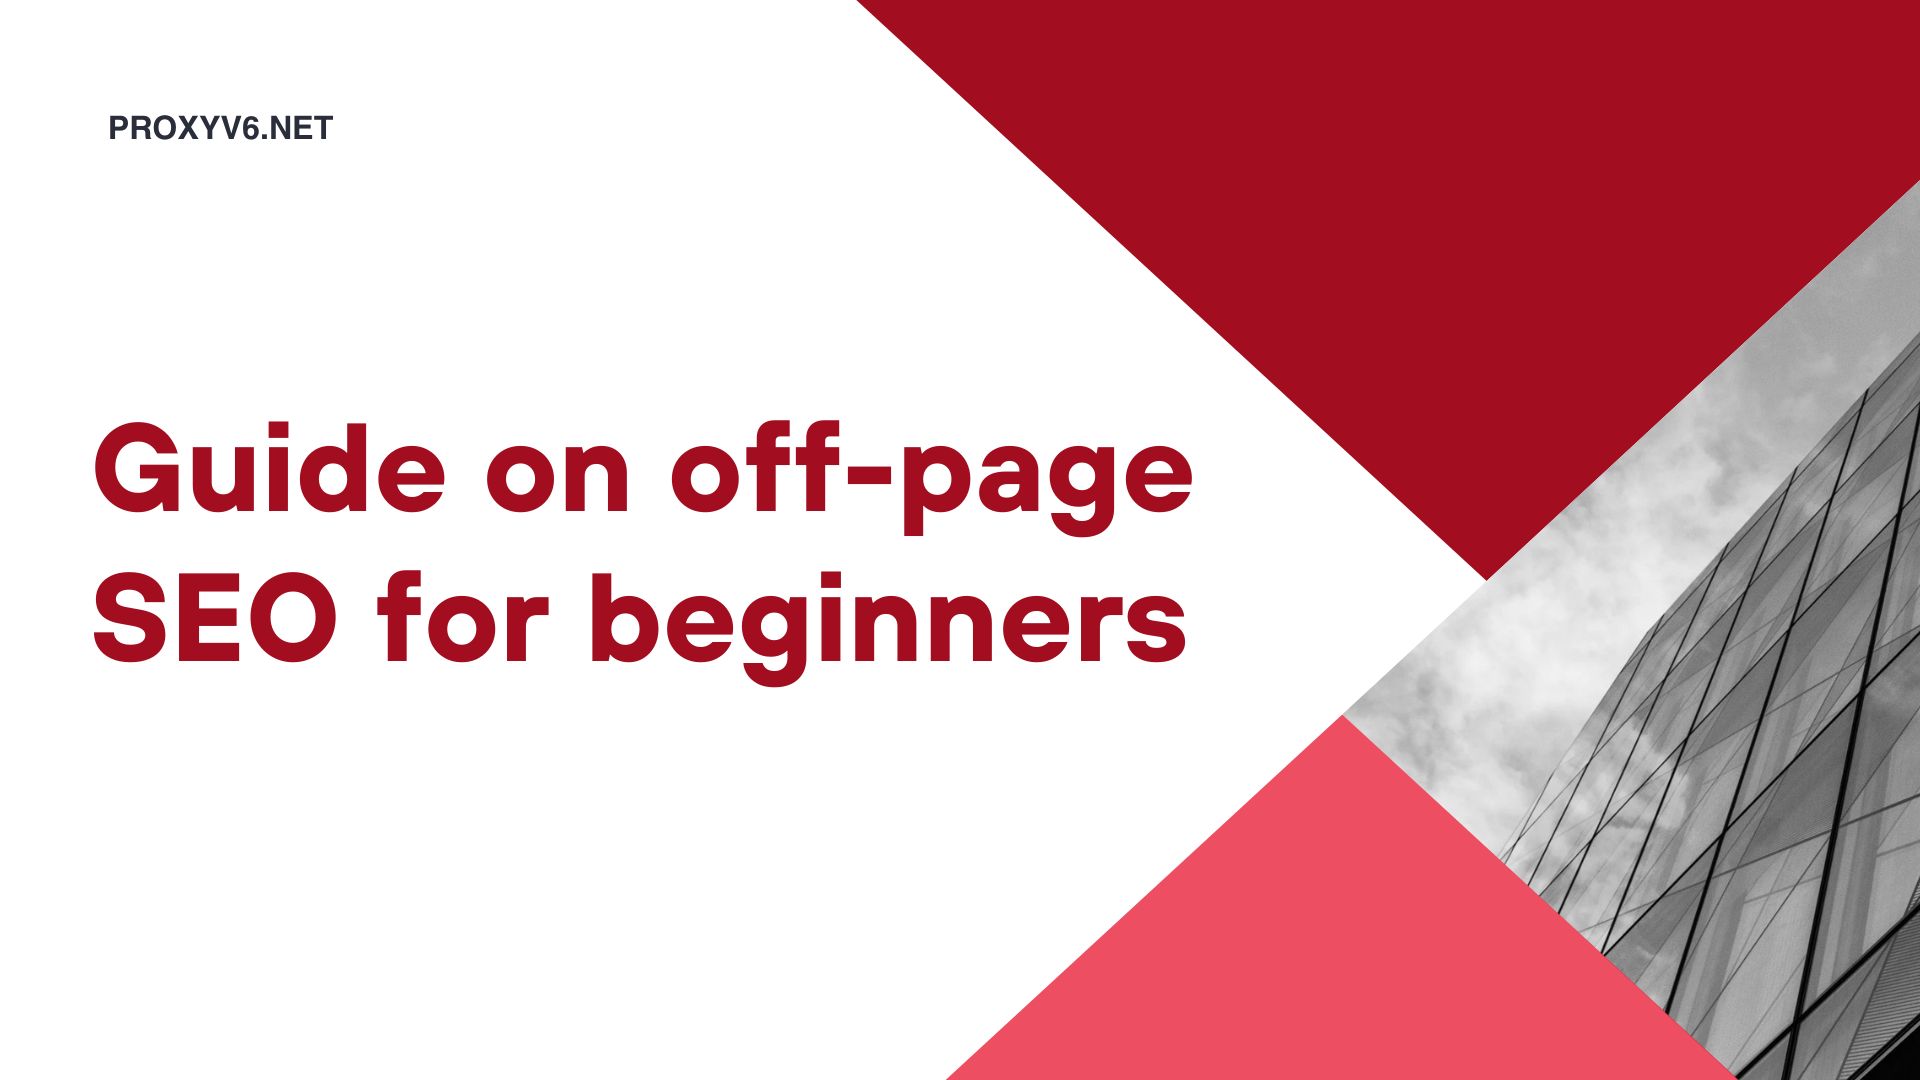 Guide on Offpage SEO for beginners